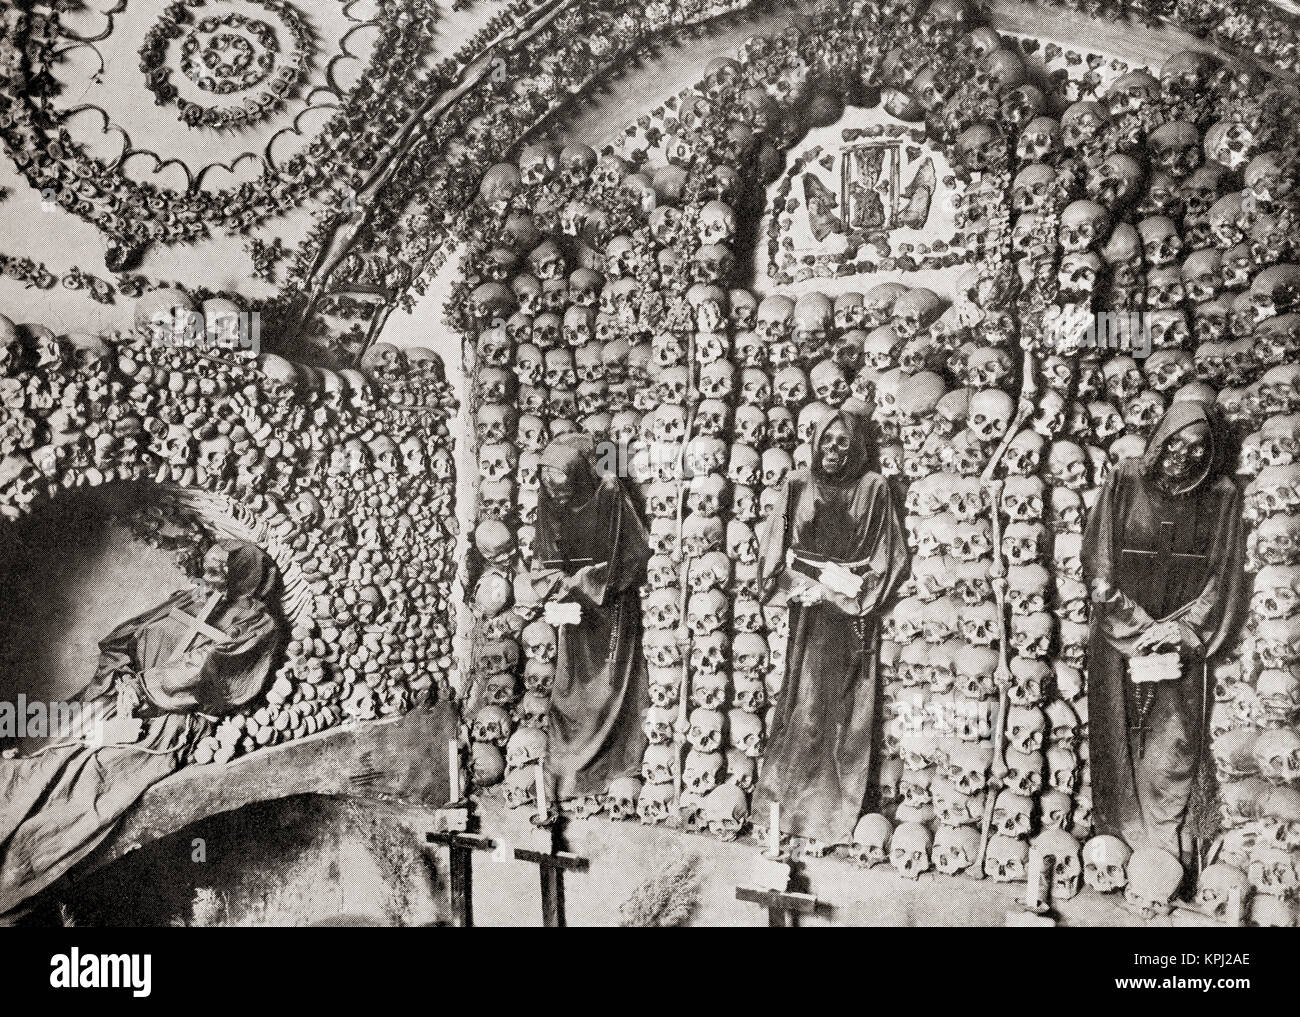 The Capuchin Crypt, a small space comprising several tiny chapels located beneath the church of Santa Maria della Concezione dei Cappuccini on the Via Veneto, Rome, Italy, lined with the skeletal remains of 3,700 bodies believed to be Capuchin friars.  From The Wonders of the World, published c.1920. Stock Photo